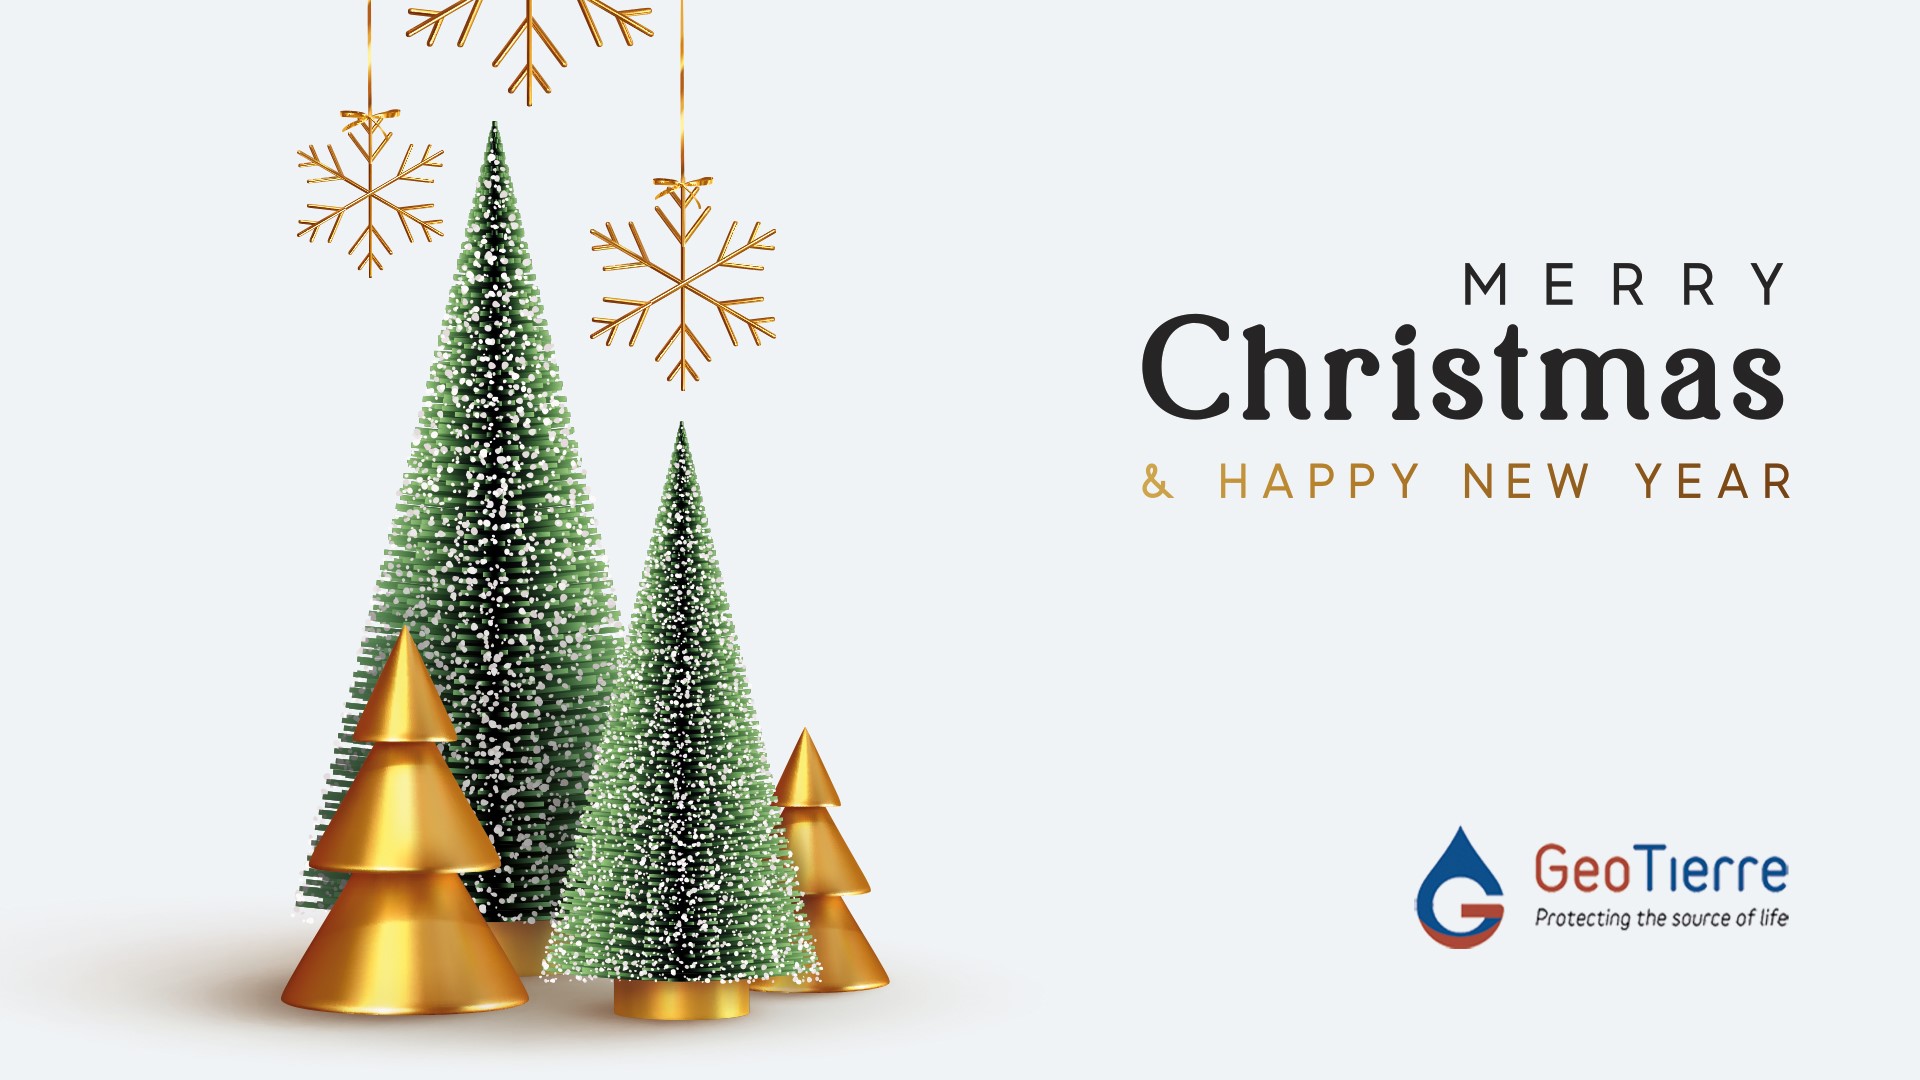 Geotierre team wish you all a Merry Christmas and an Happy new Year 